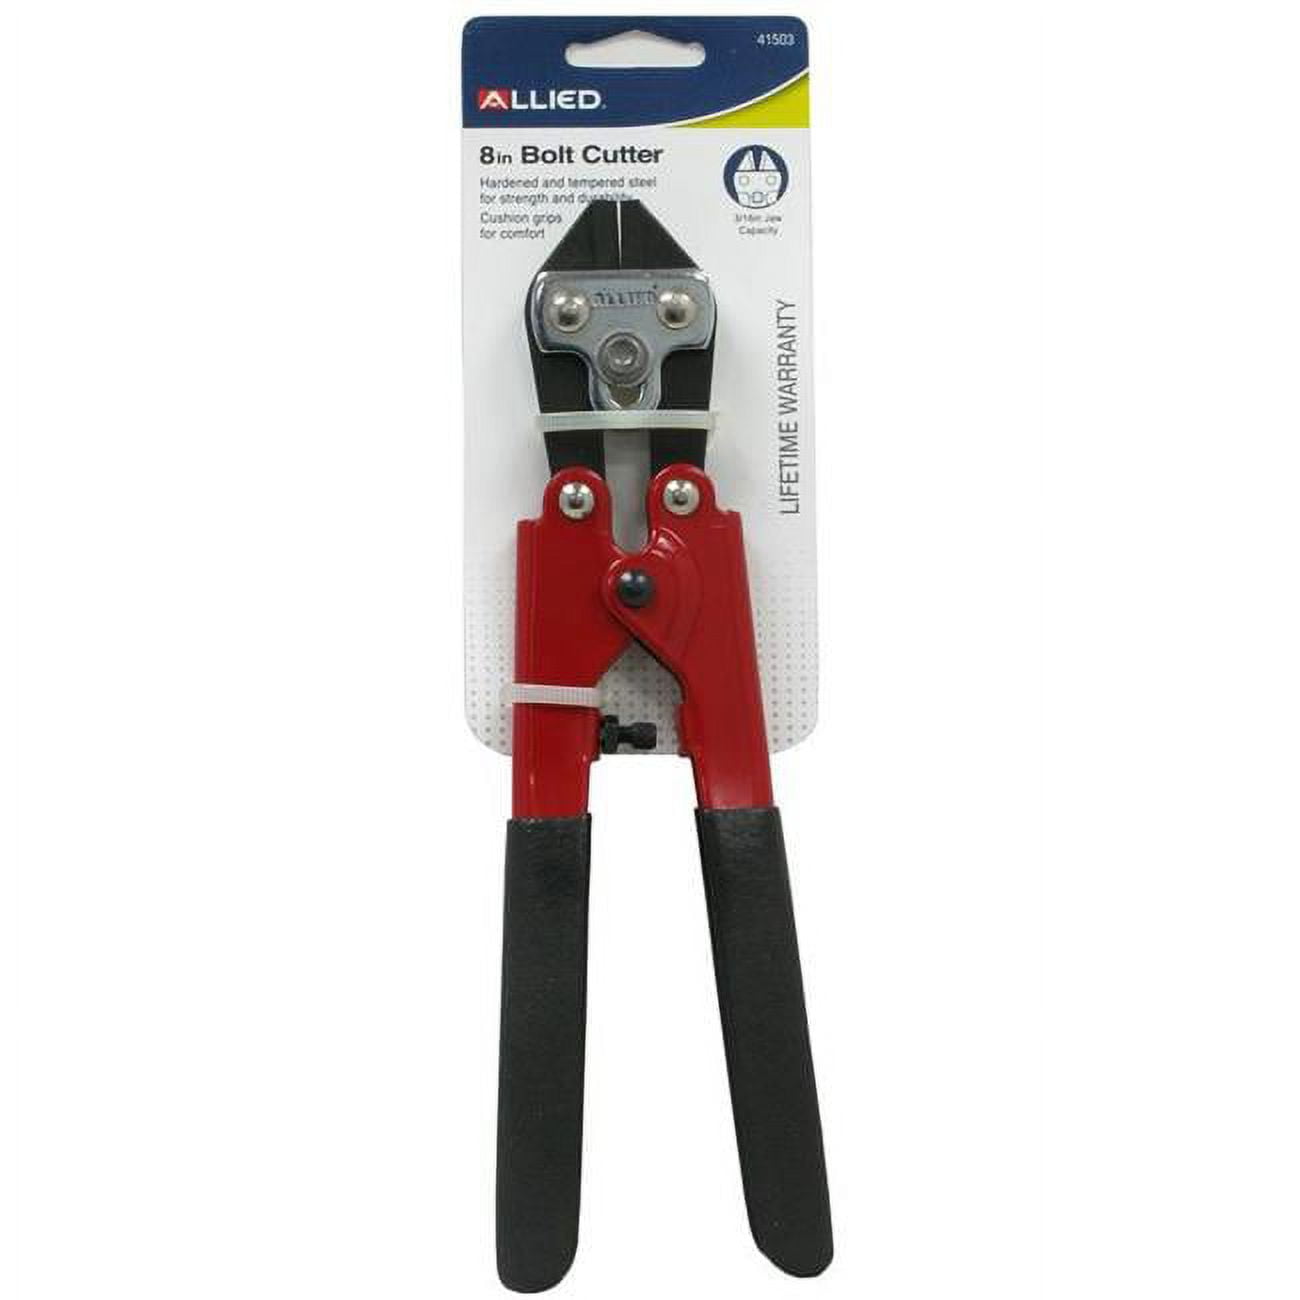 Picture of Allied 41503 8 in. Bolt Cutter